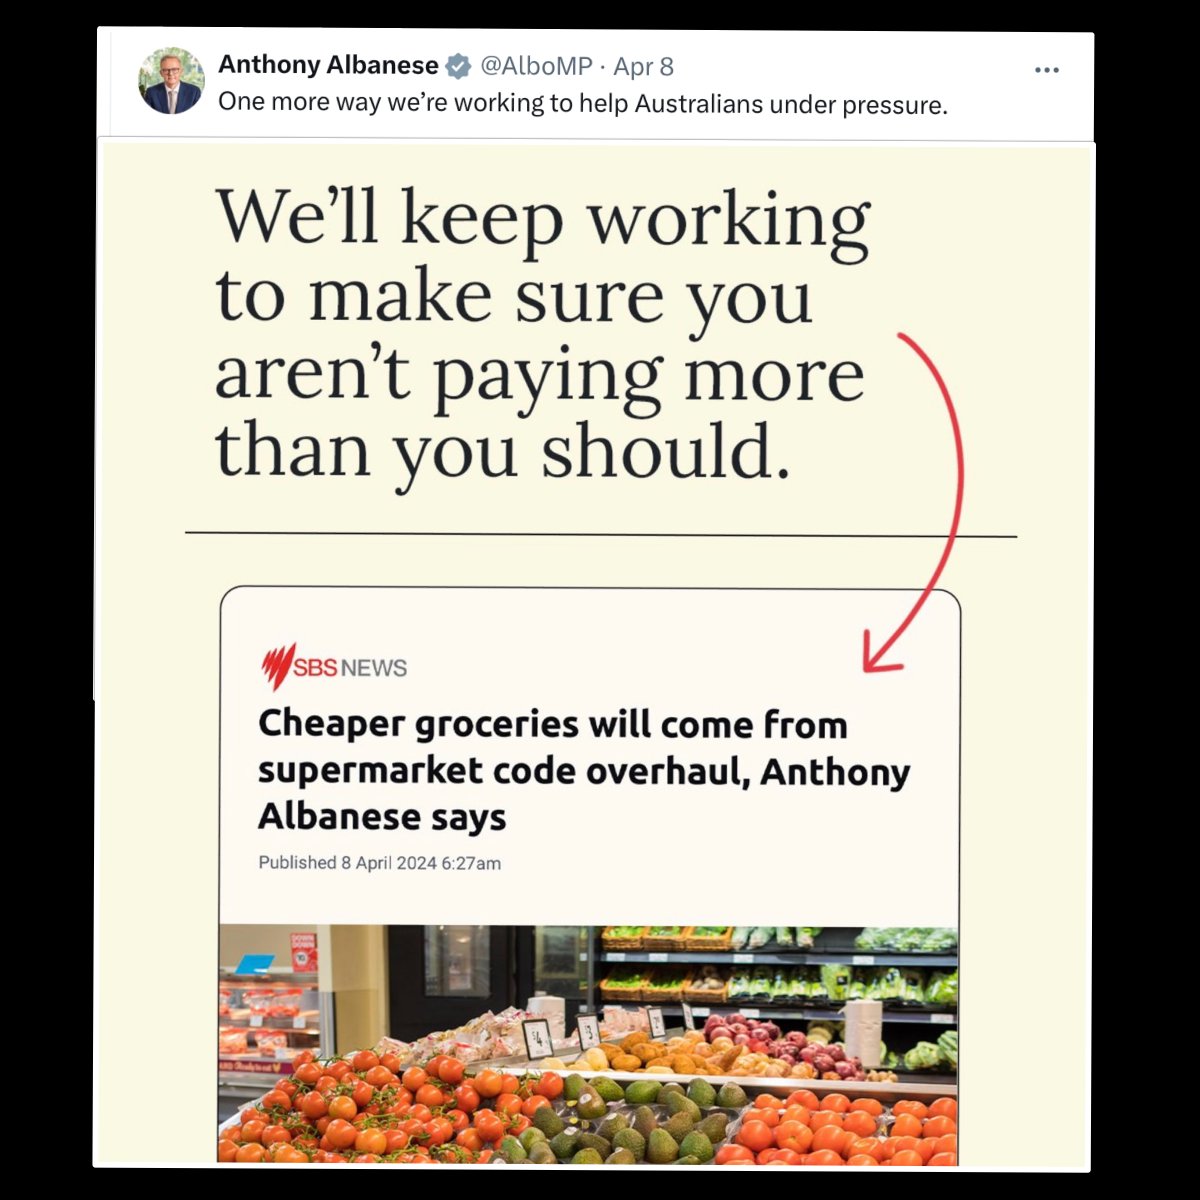 Anyone that thinks 'cheaper groceries' will come from Albanese’s policies needs psychiatric assessment.